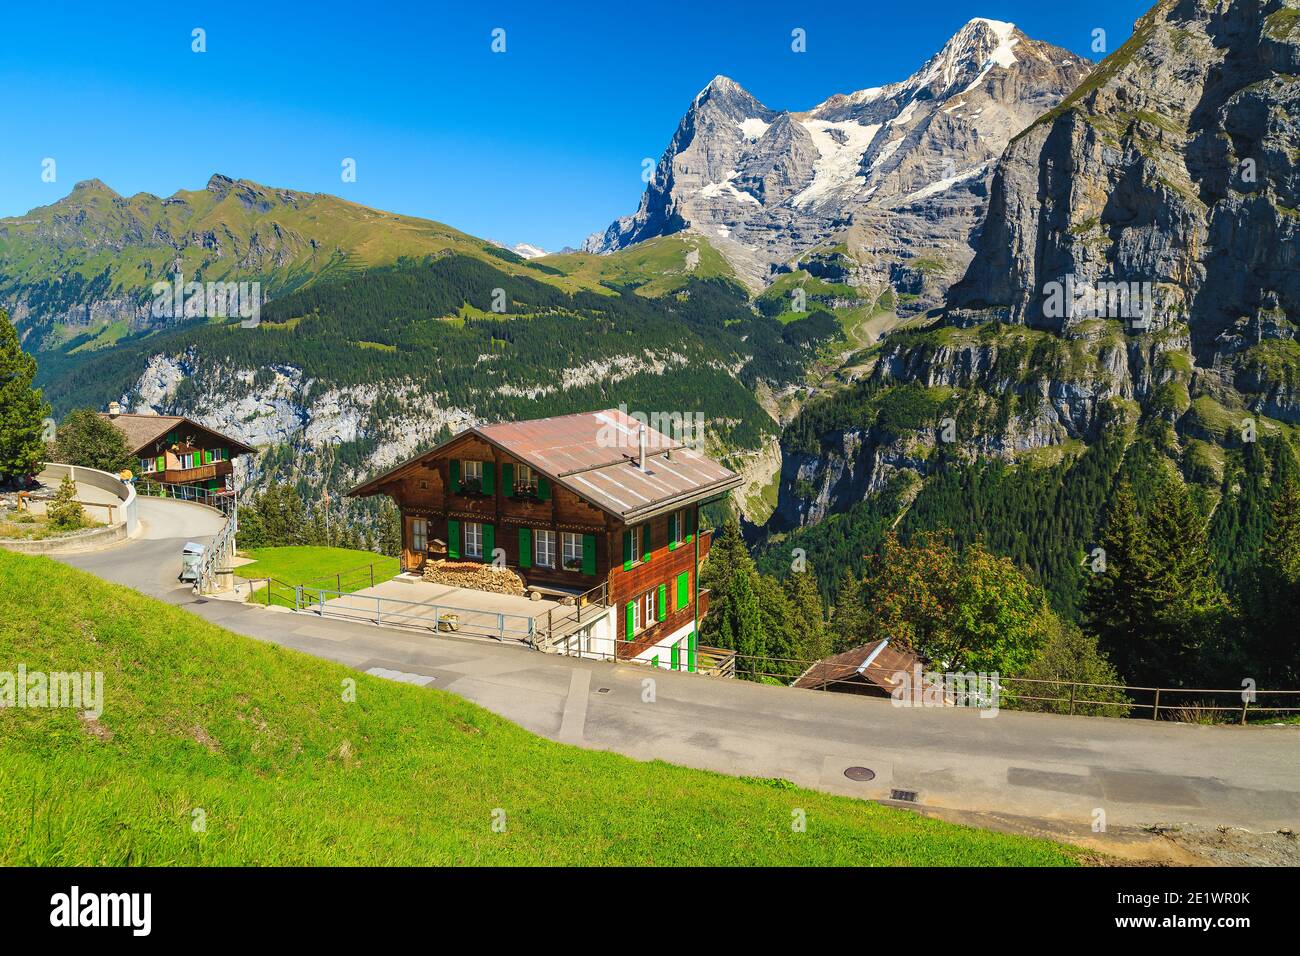 Famous mountain resort with old wooden houses and high mountains in background, Murren, Bernese Oberland, Switzerland, Europe Stock Photo